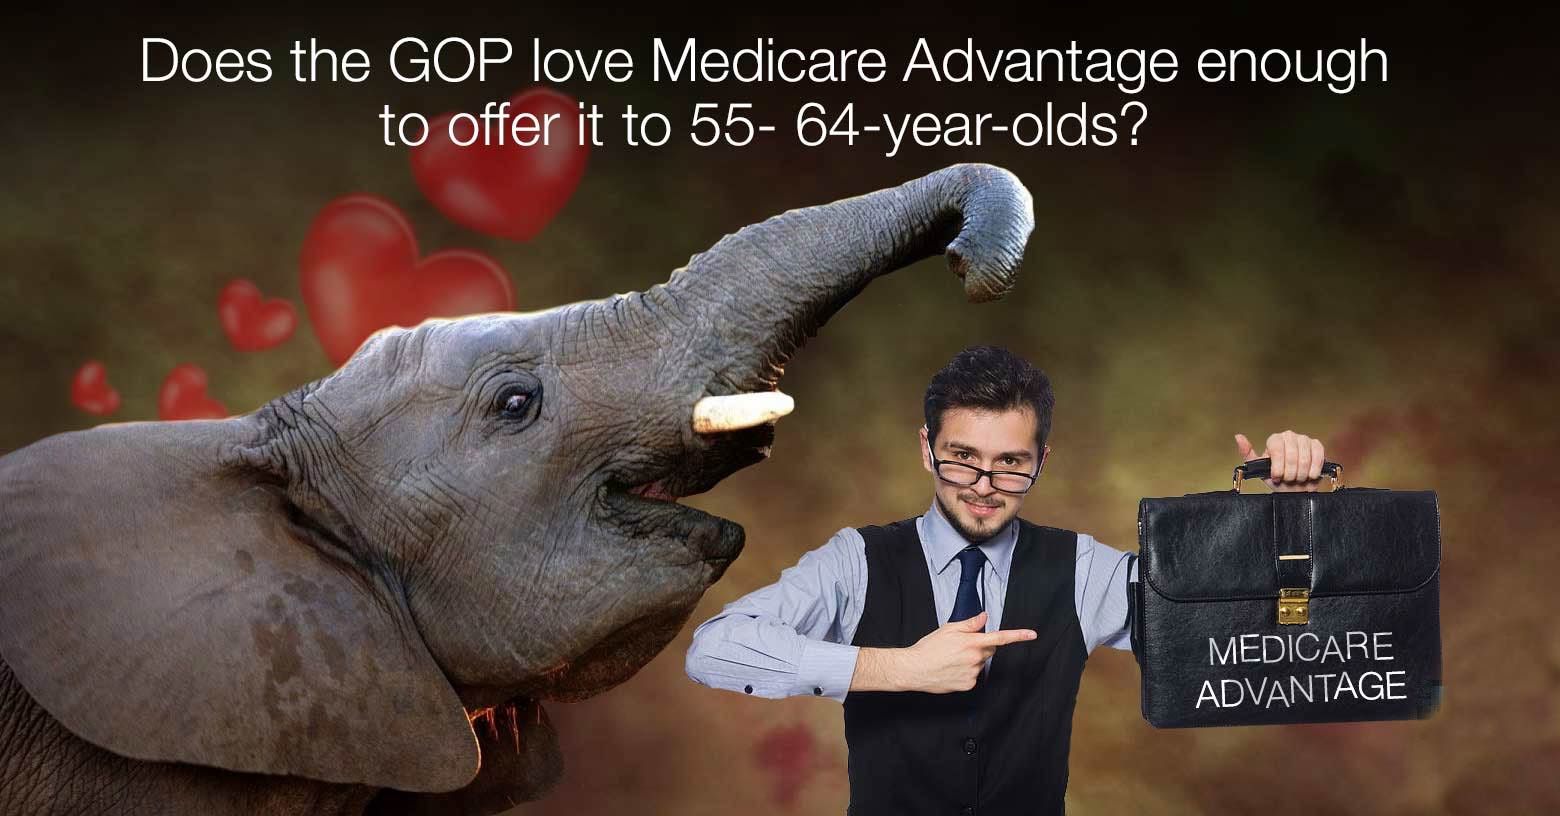 Medicare-advantage as a thing.